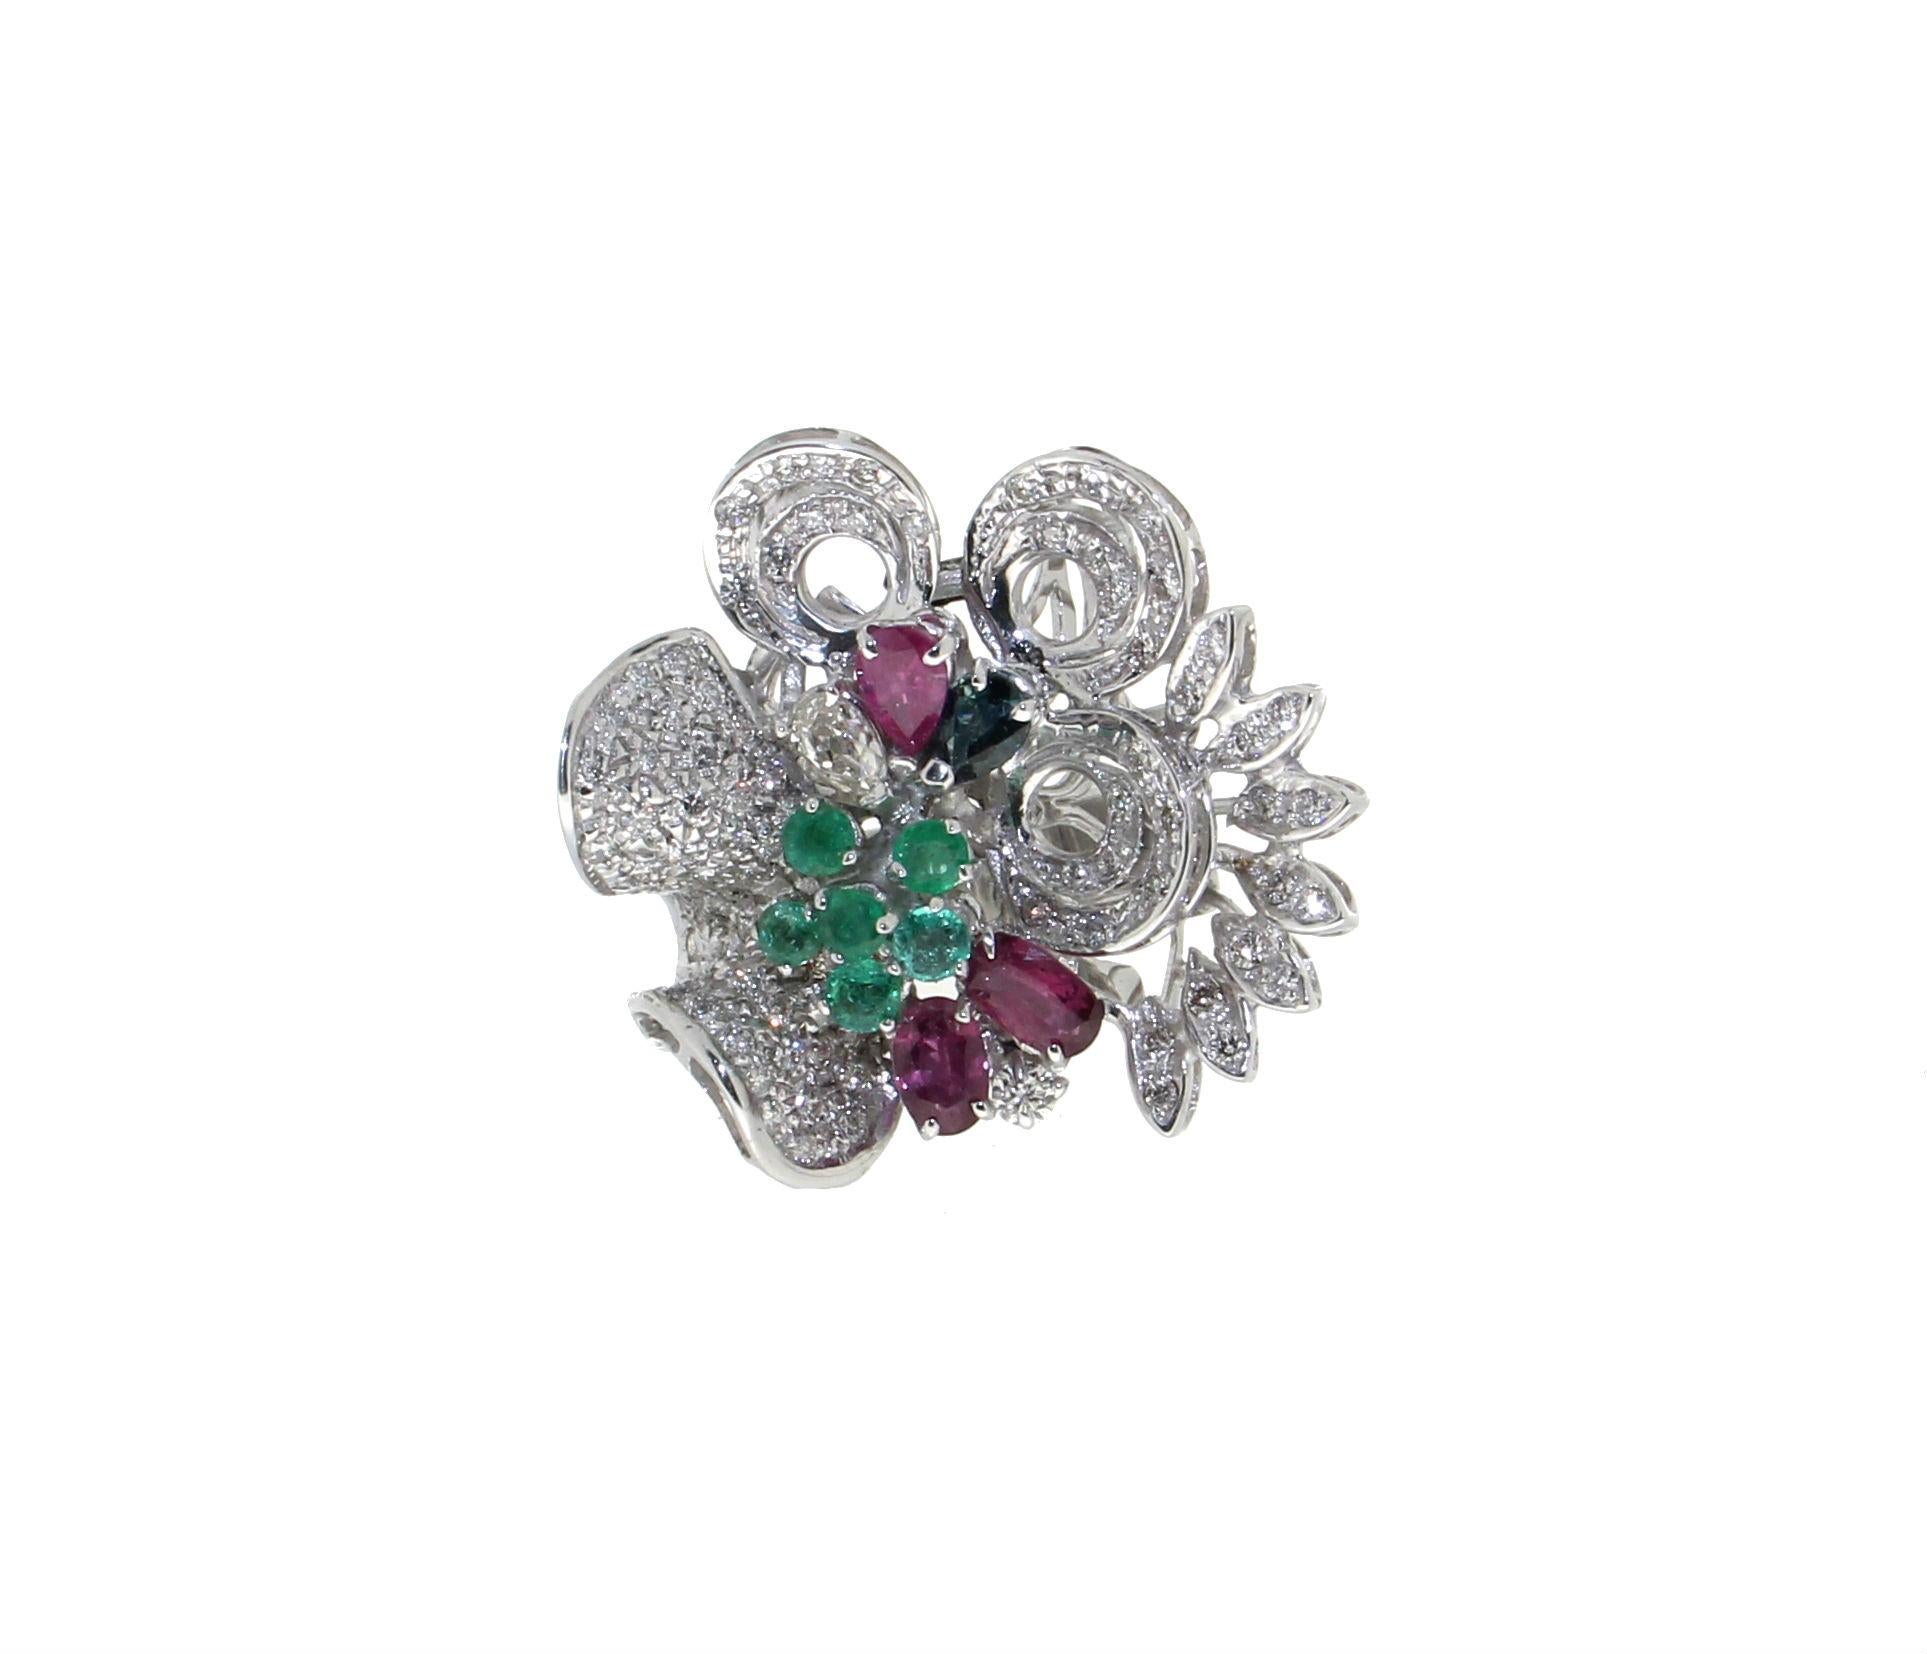 Handcraft Diamonds 18 Karat White Gold Ruby Emerald Sapphires Cocktail Ring For Sale 3